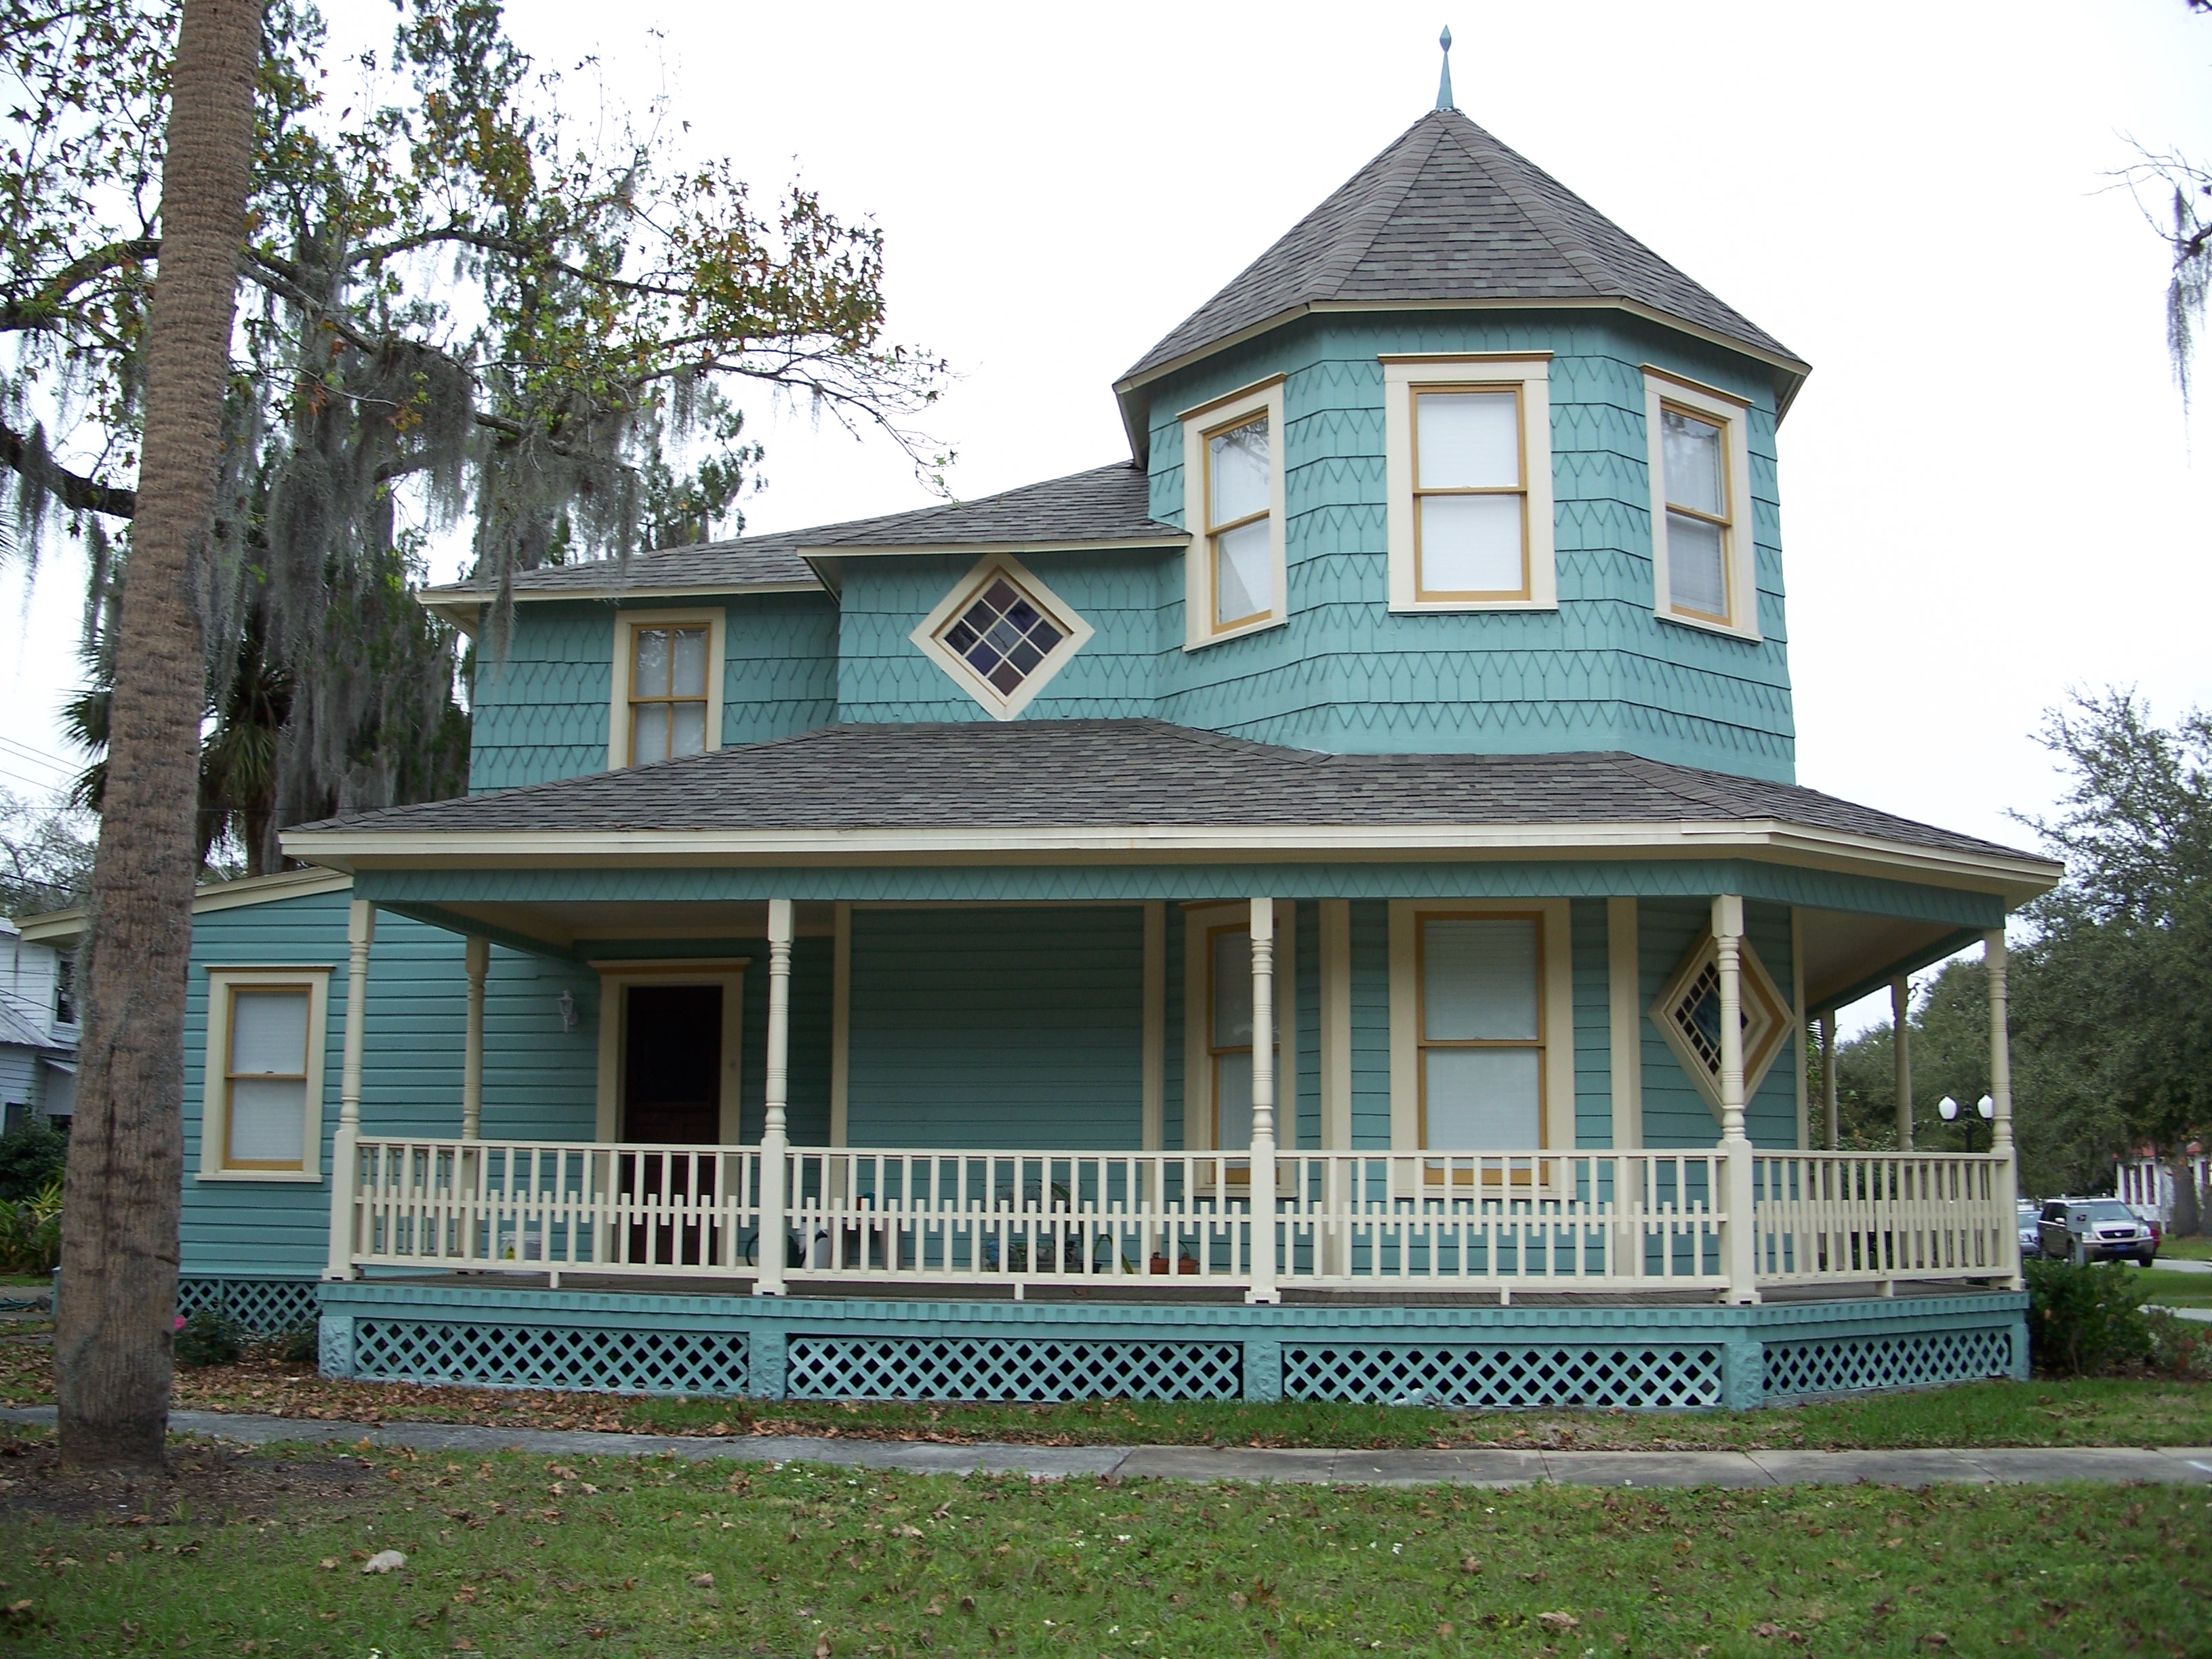  Sanford  Residential Historic  District Florida  Roadtrippers